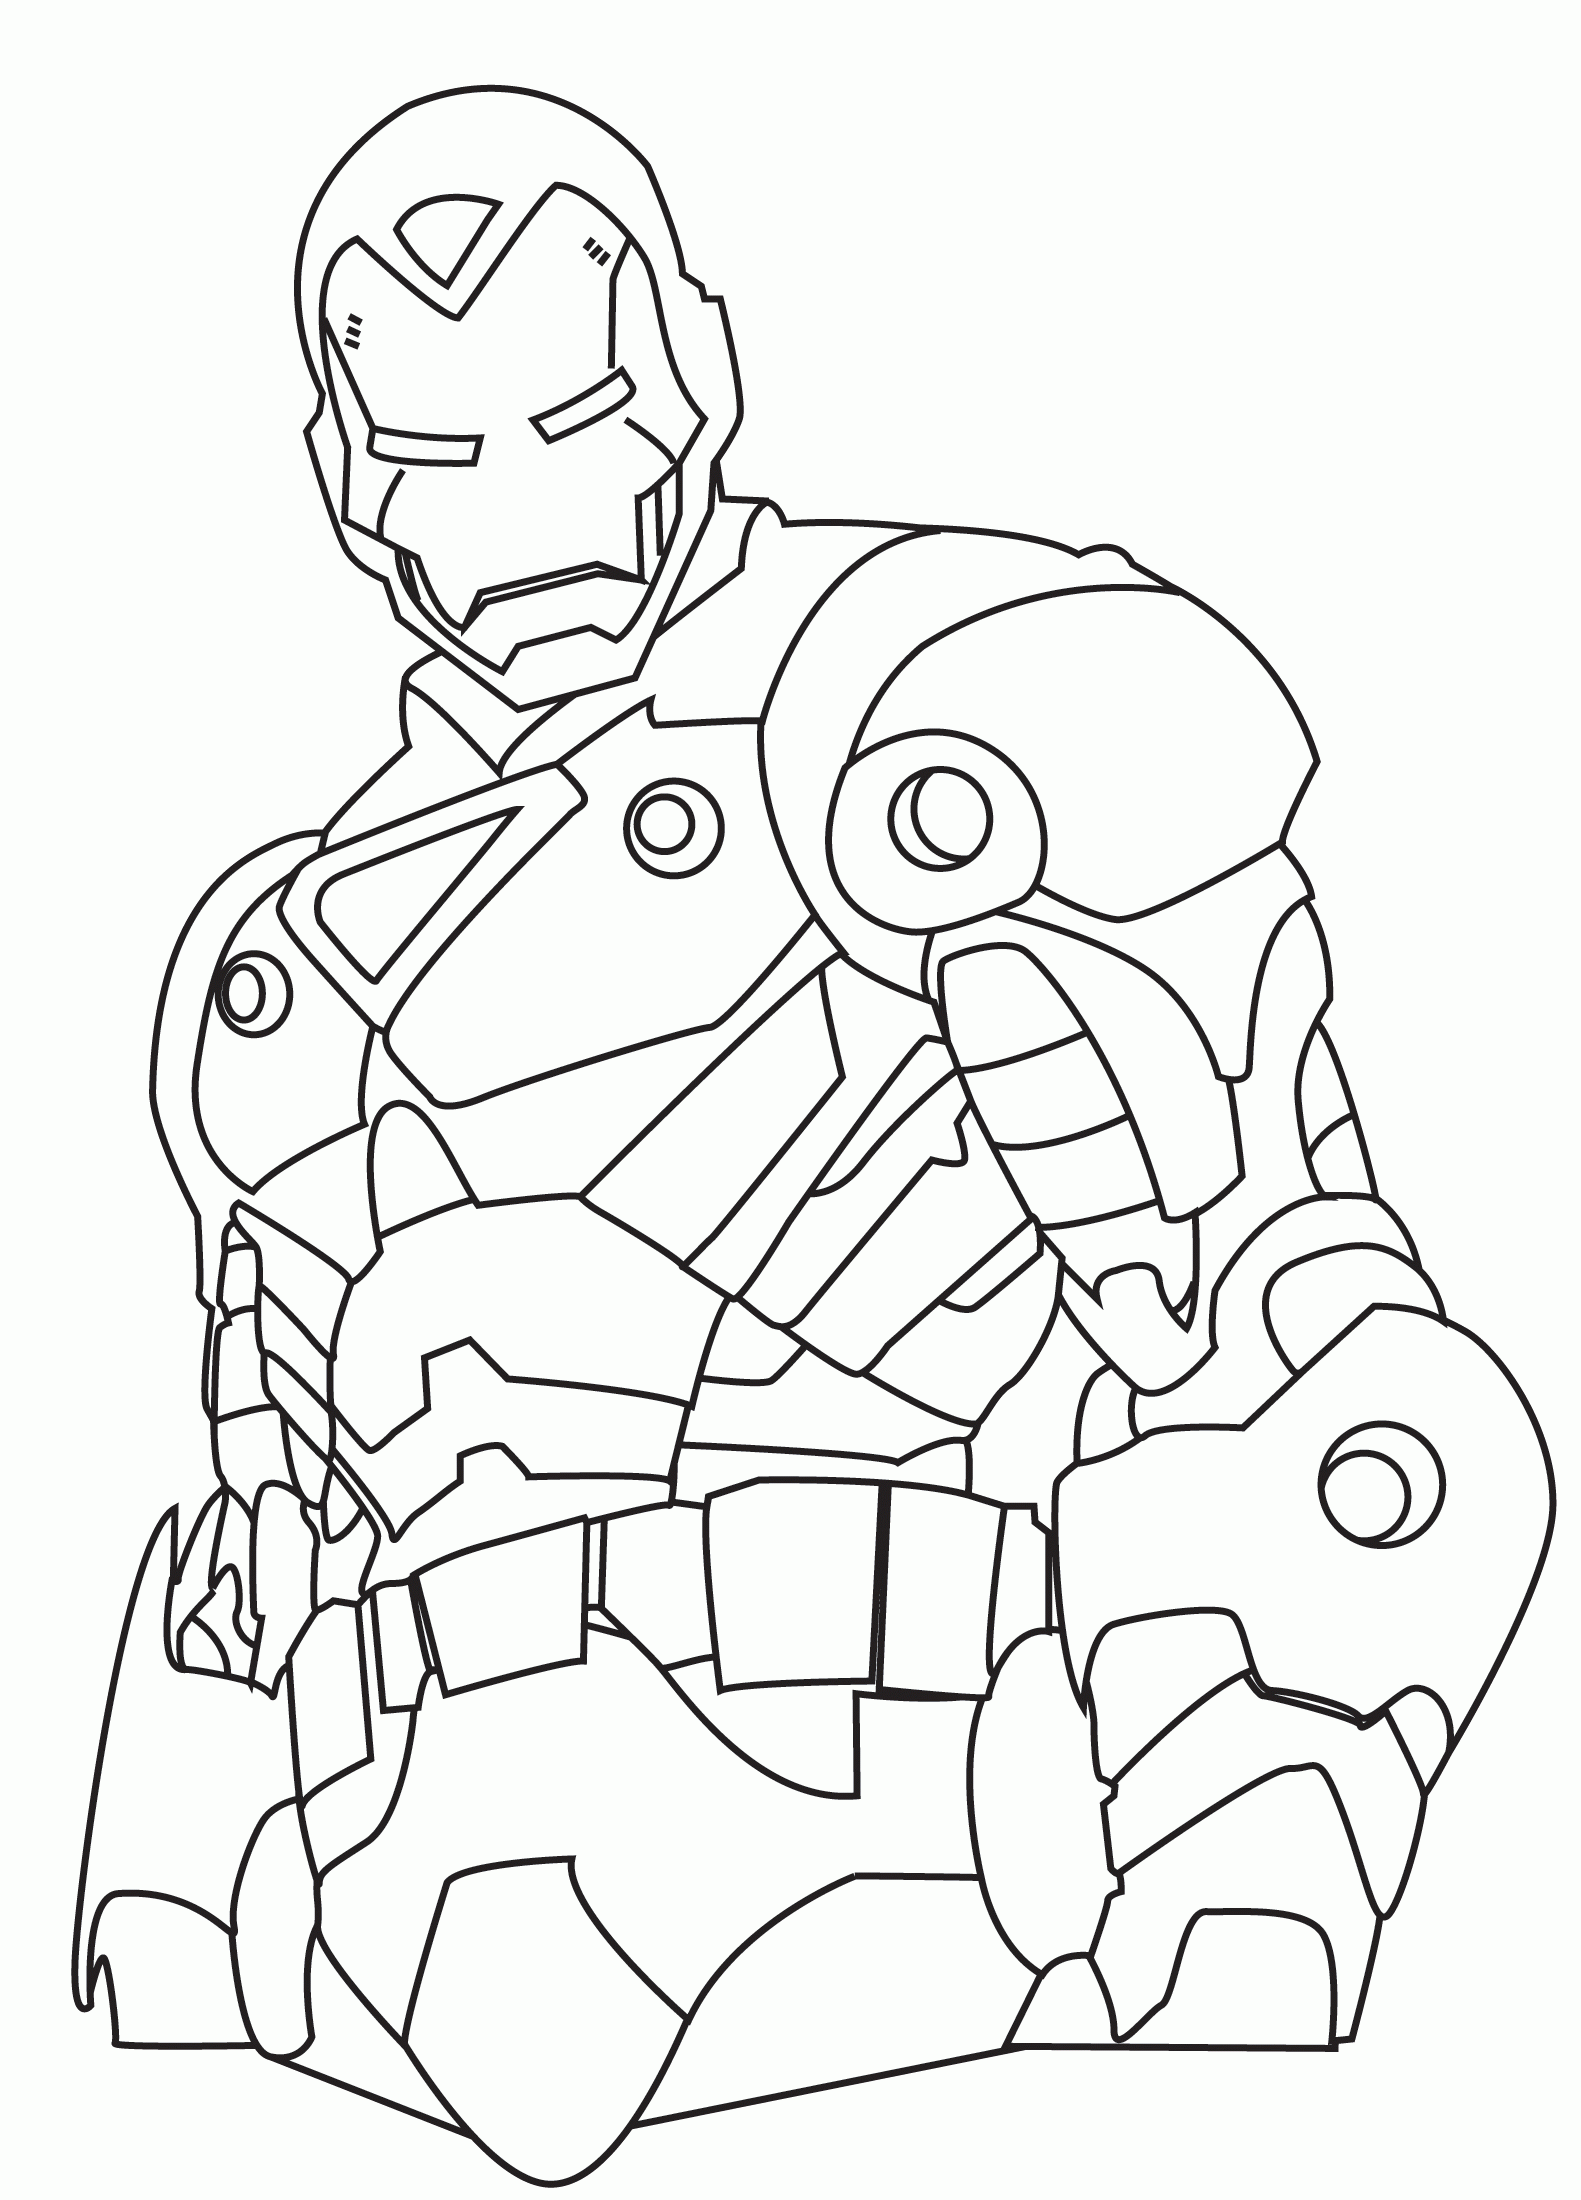 Iron Man Coloring Pages For Toddlers – Tips And Solution